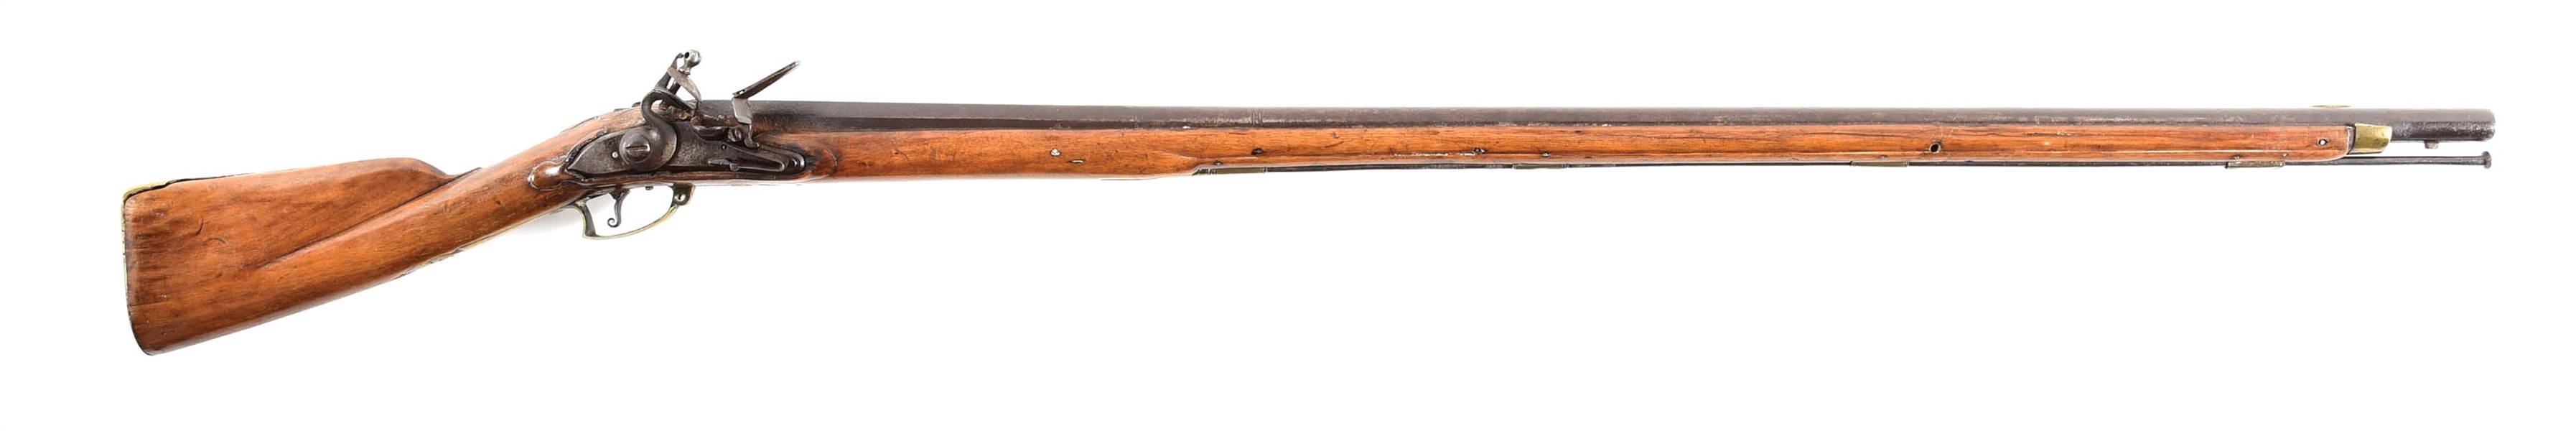 (A) SCARCE AND EARLY 18TH CENTURY DUTCH FLINTLOCK MUSKET.